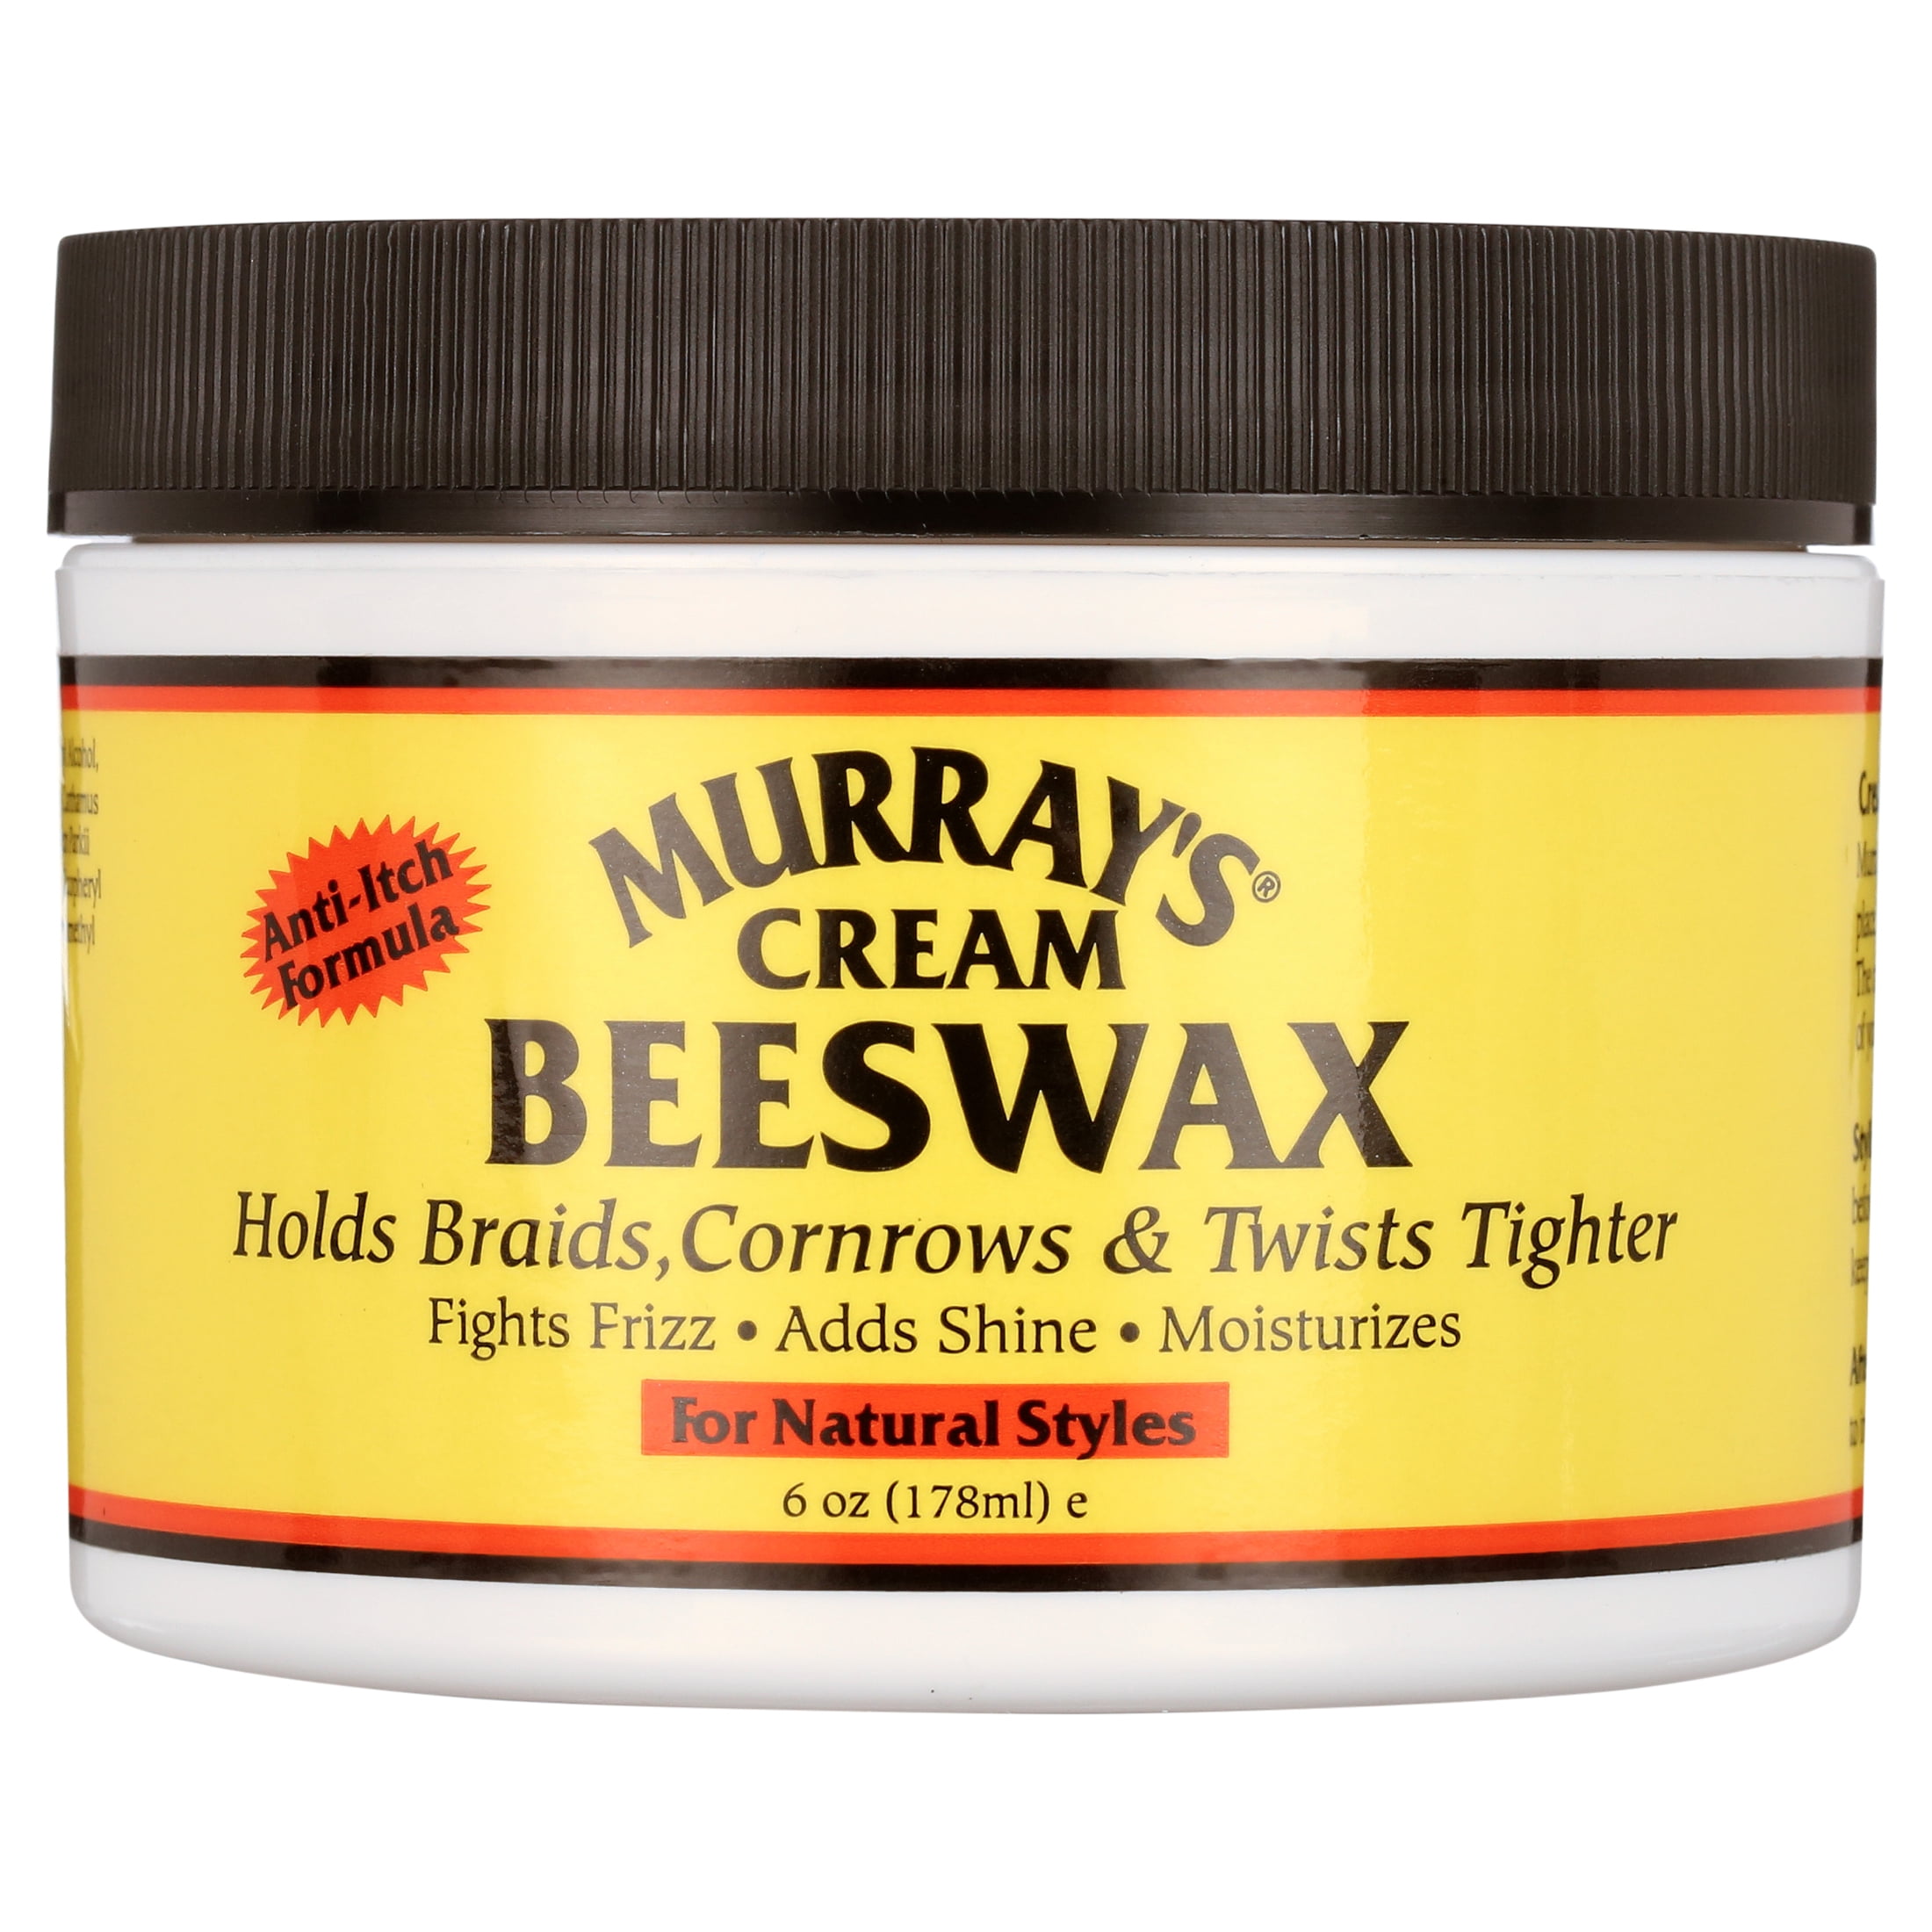 Murray's Cream Beeswax Review - JC Hillhouse Murray's Review –